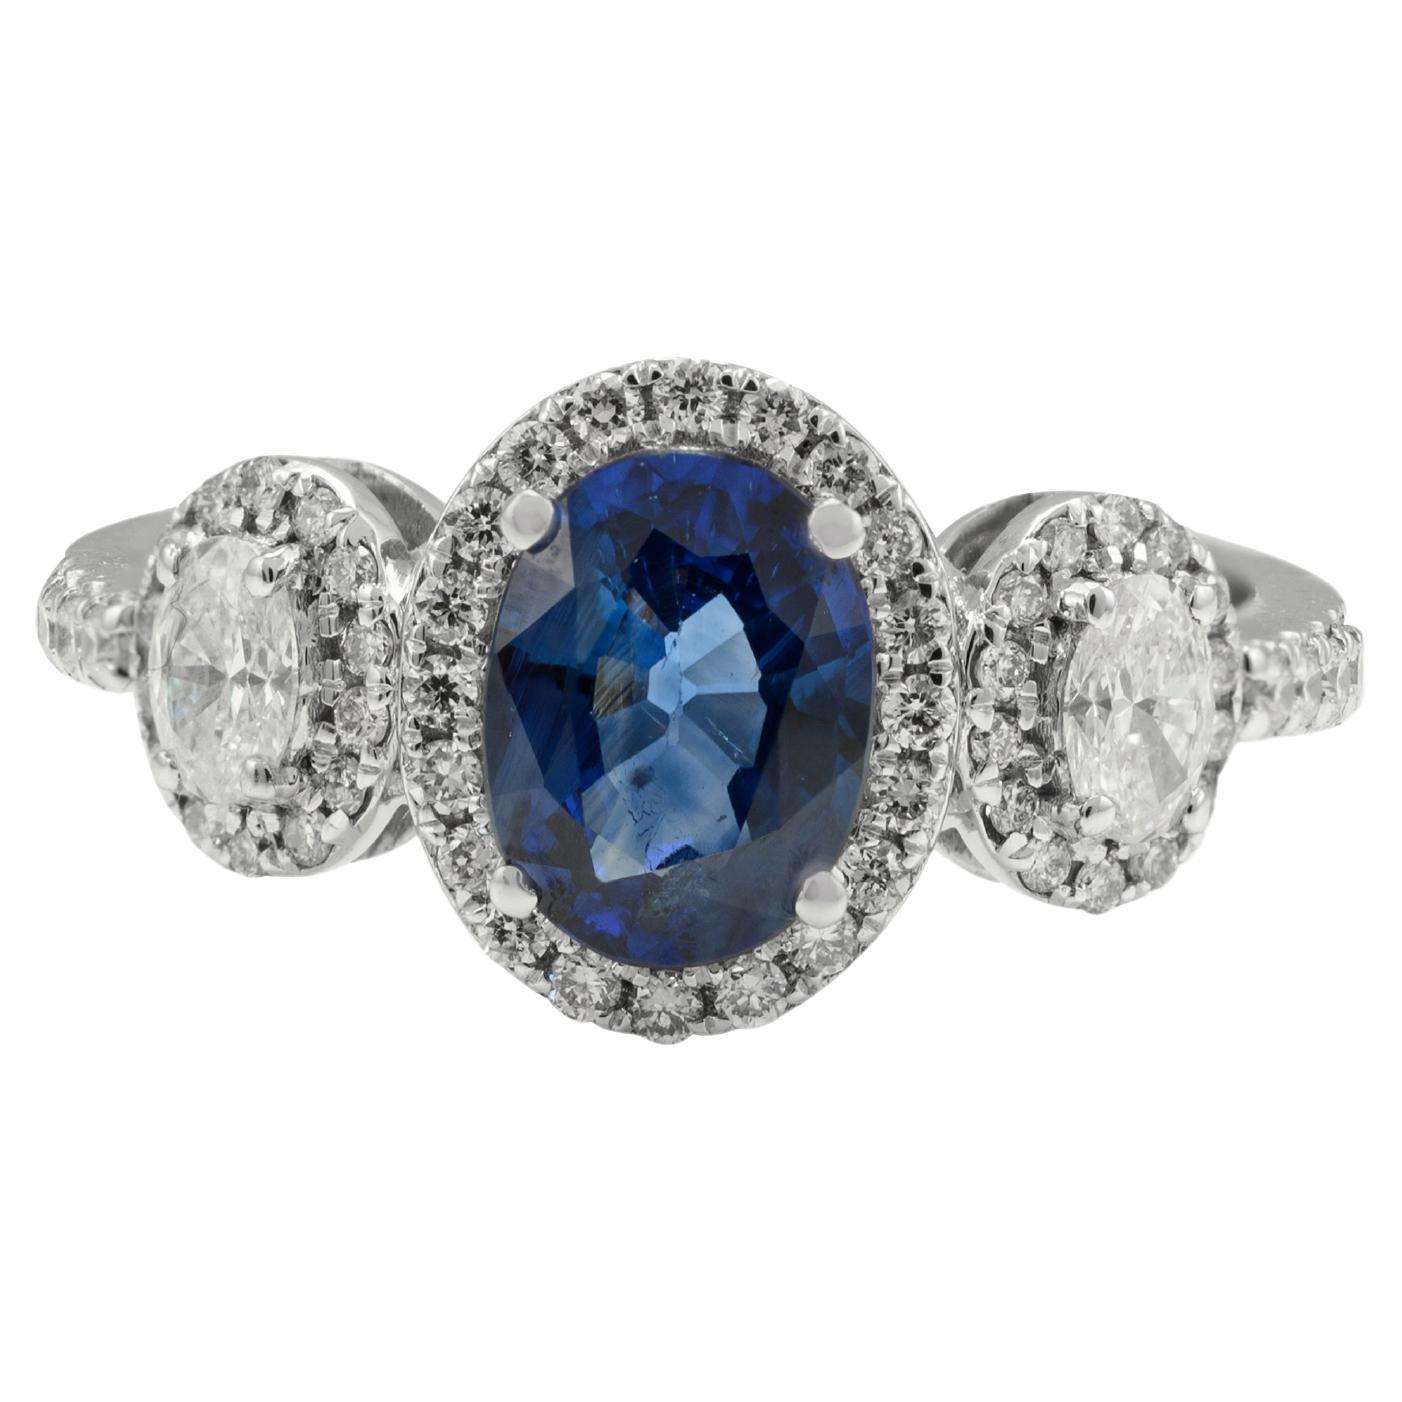 For Sale:  Certified Diamond and Blue Sapphire Three Stone Ring 18k Solid White Gold